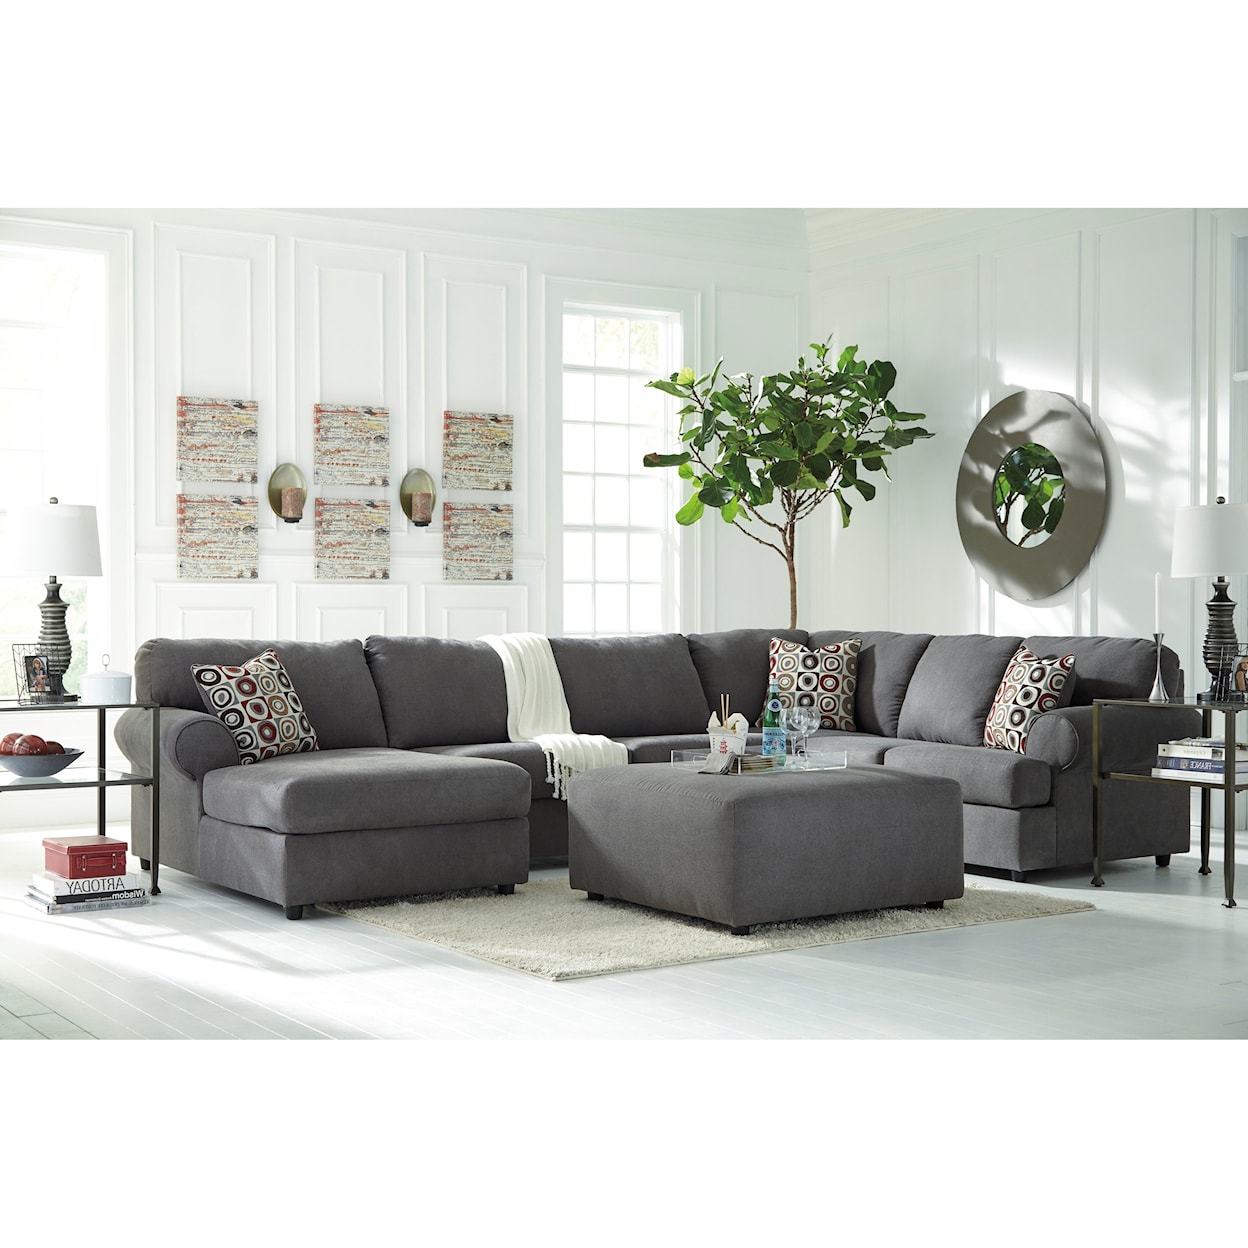 Ashley Jayceon Jayceon Sectional Couch with Chaise